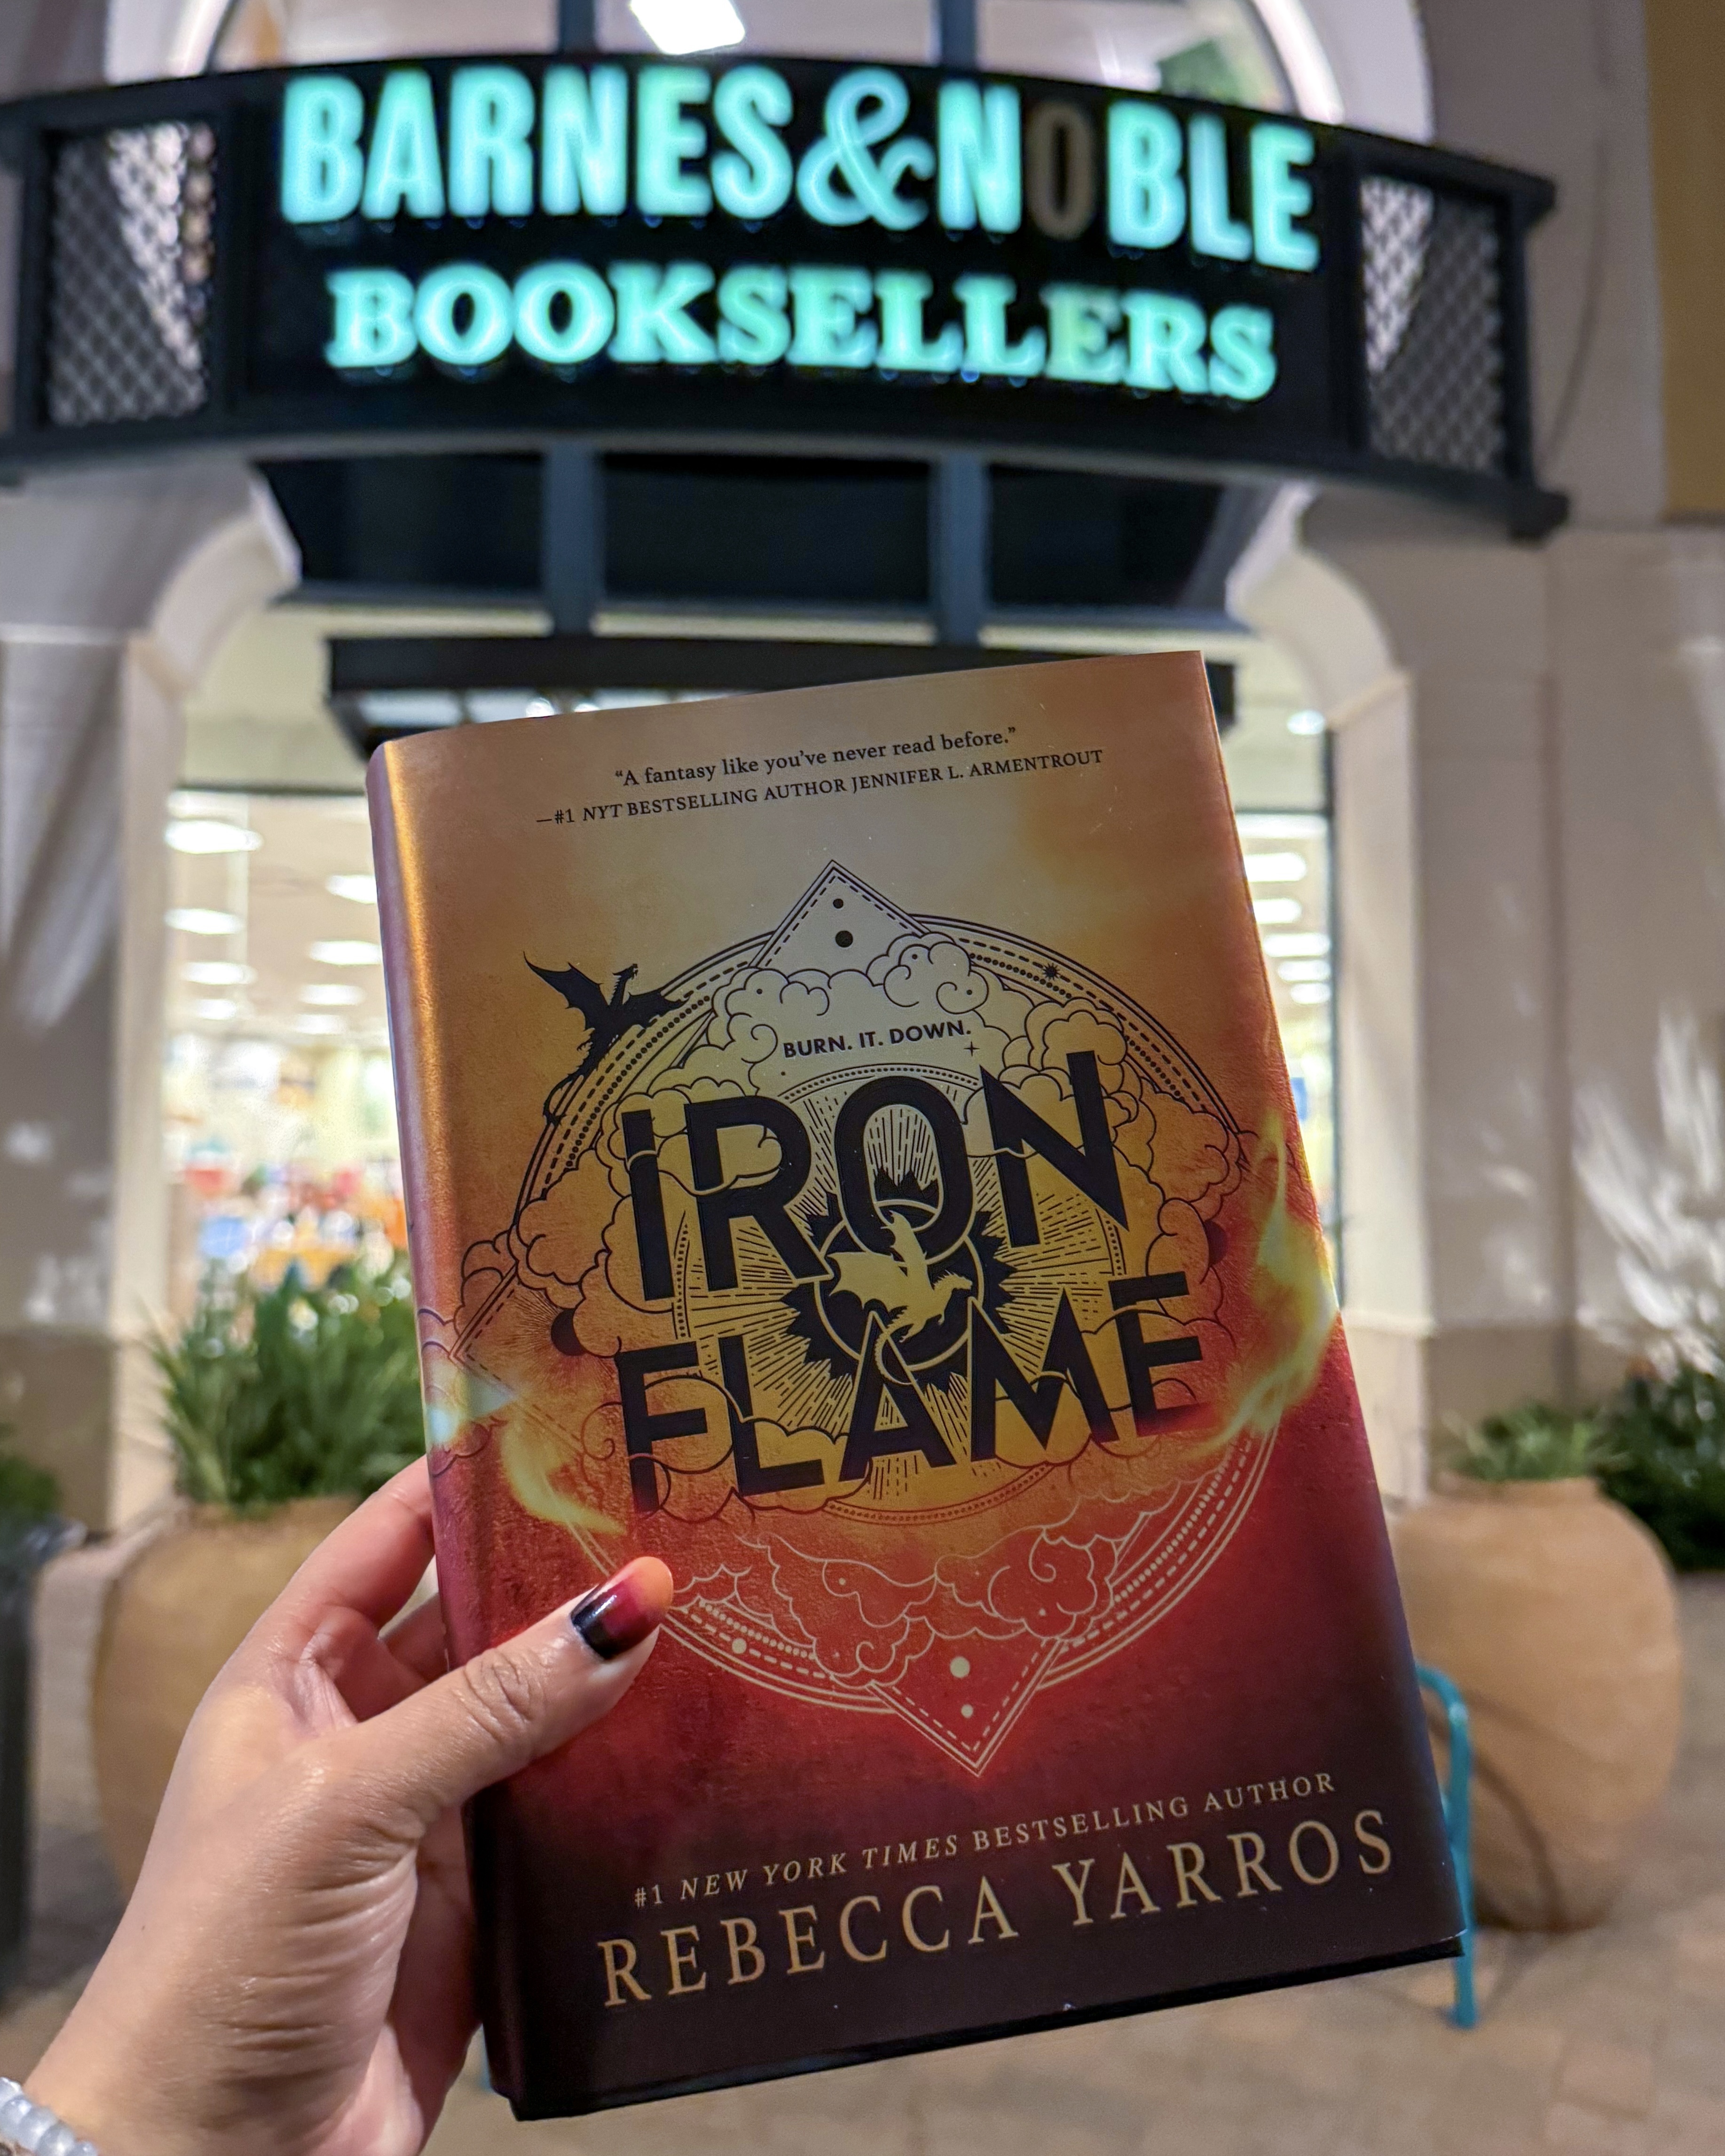 Book Review: Iron Flame by Rebecca Yarros #IronFlame #FourthWing